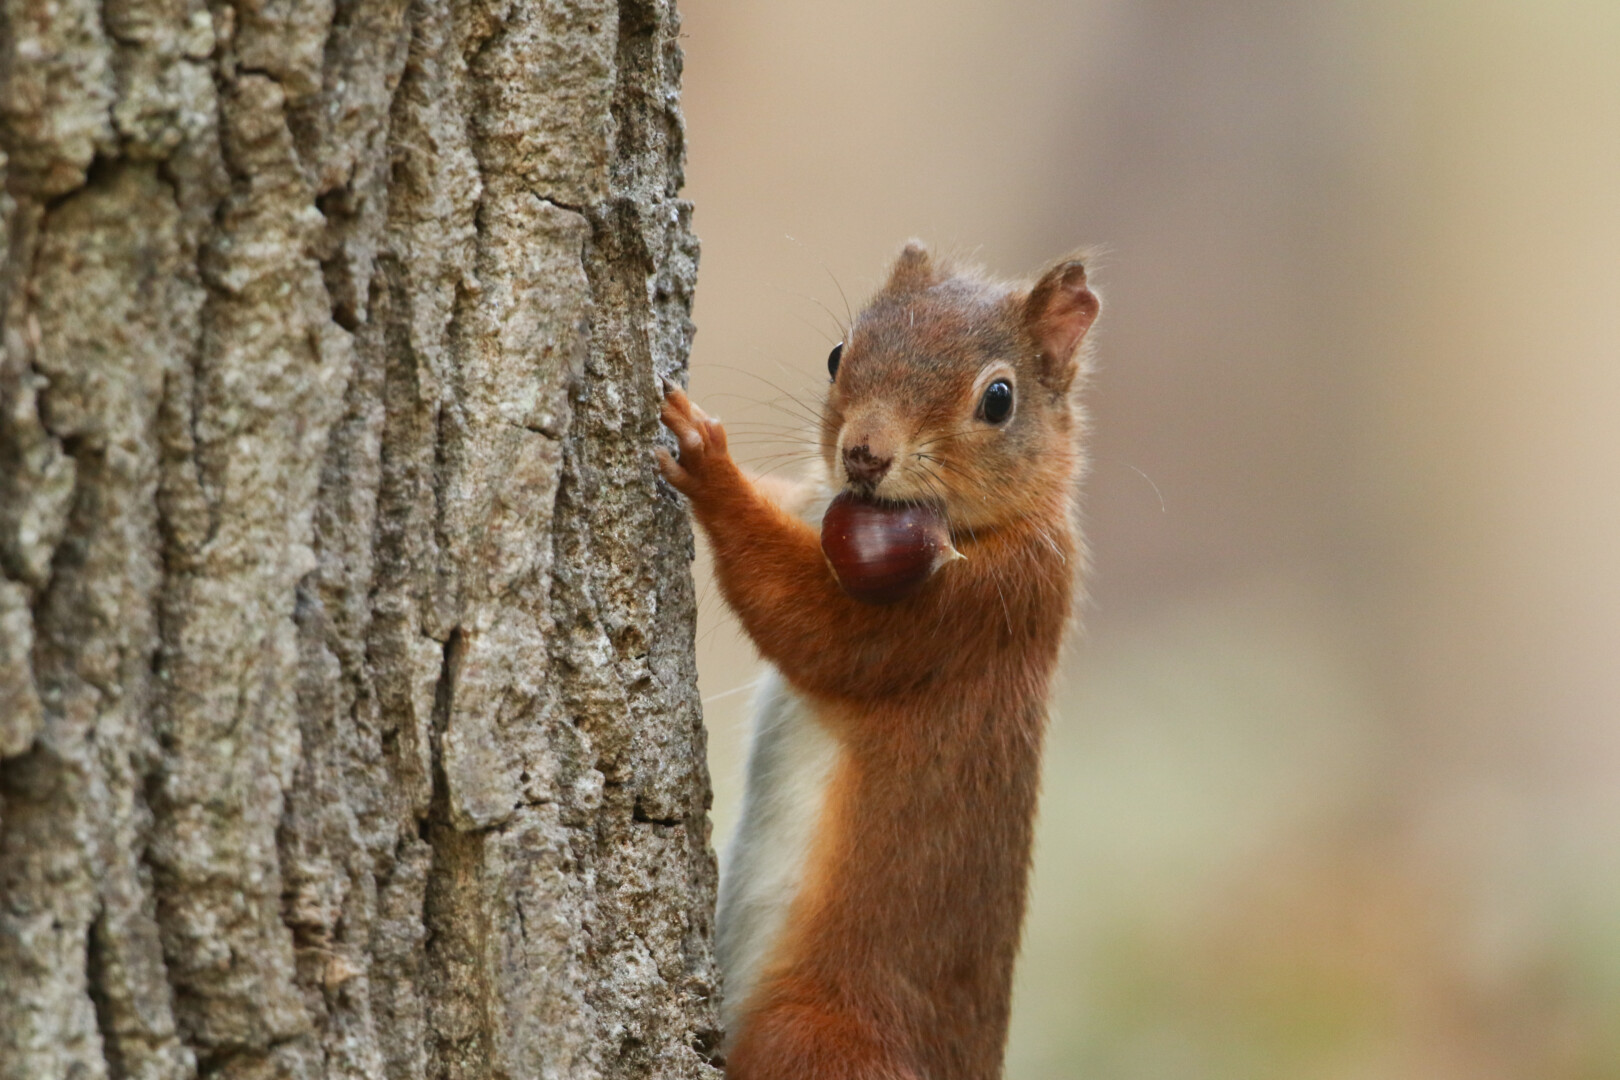 A cute Red Squirrel, Sciurus vulgaris, climbing up a tree trunk with a Sweet Chestnut in its mouth.